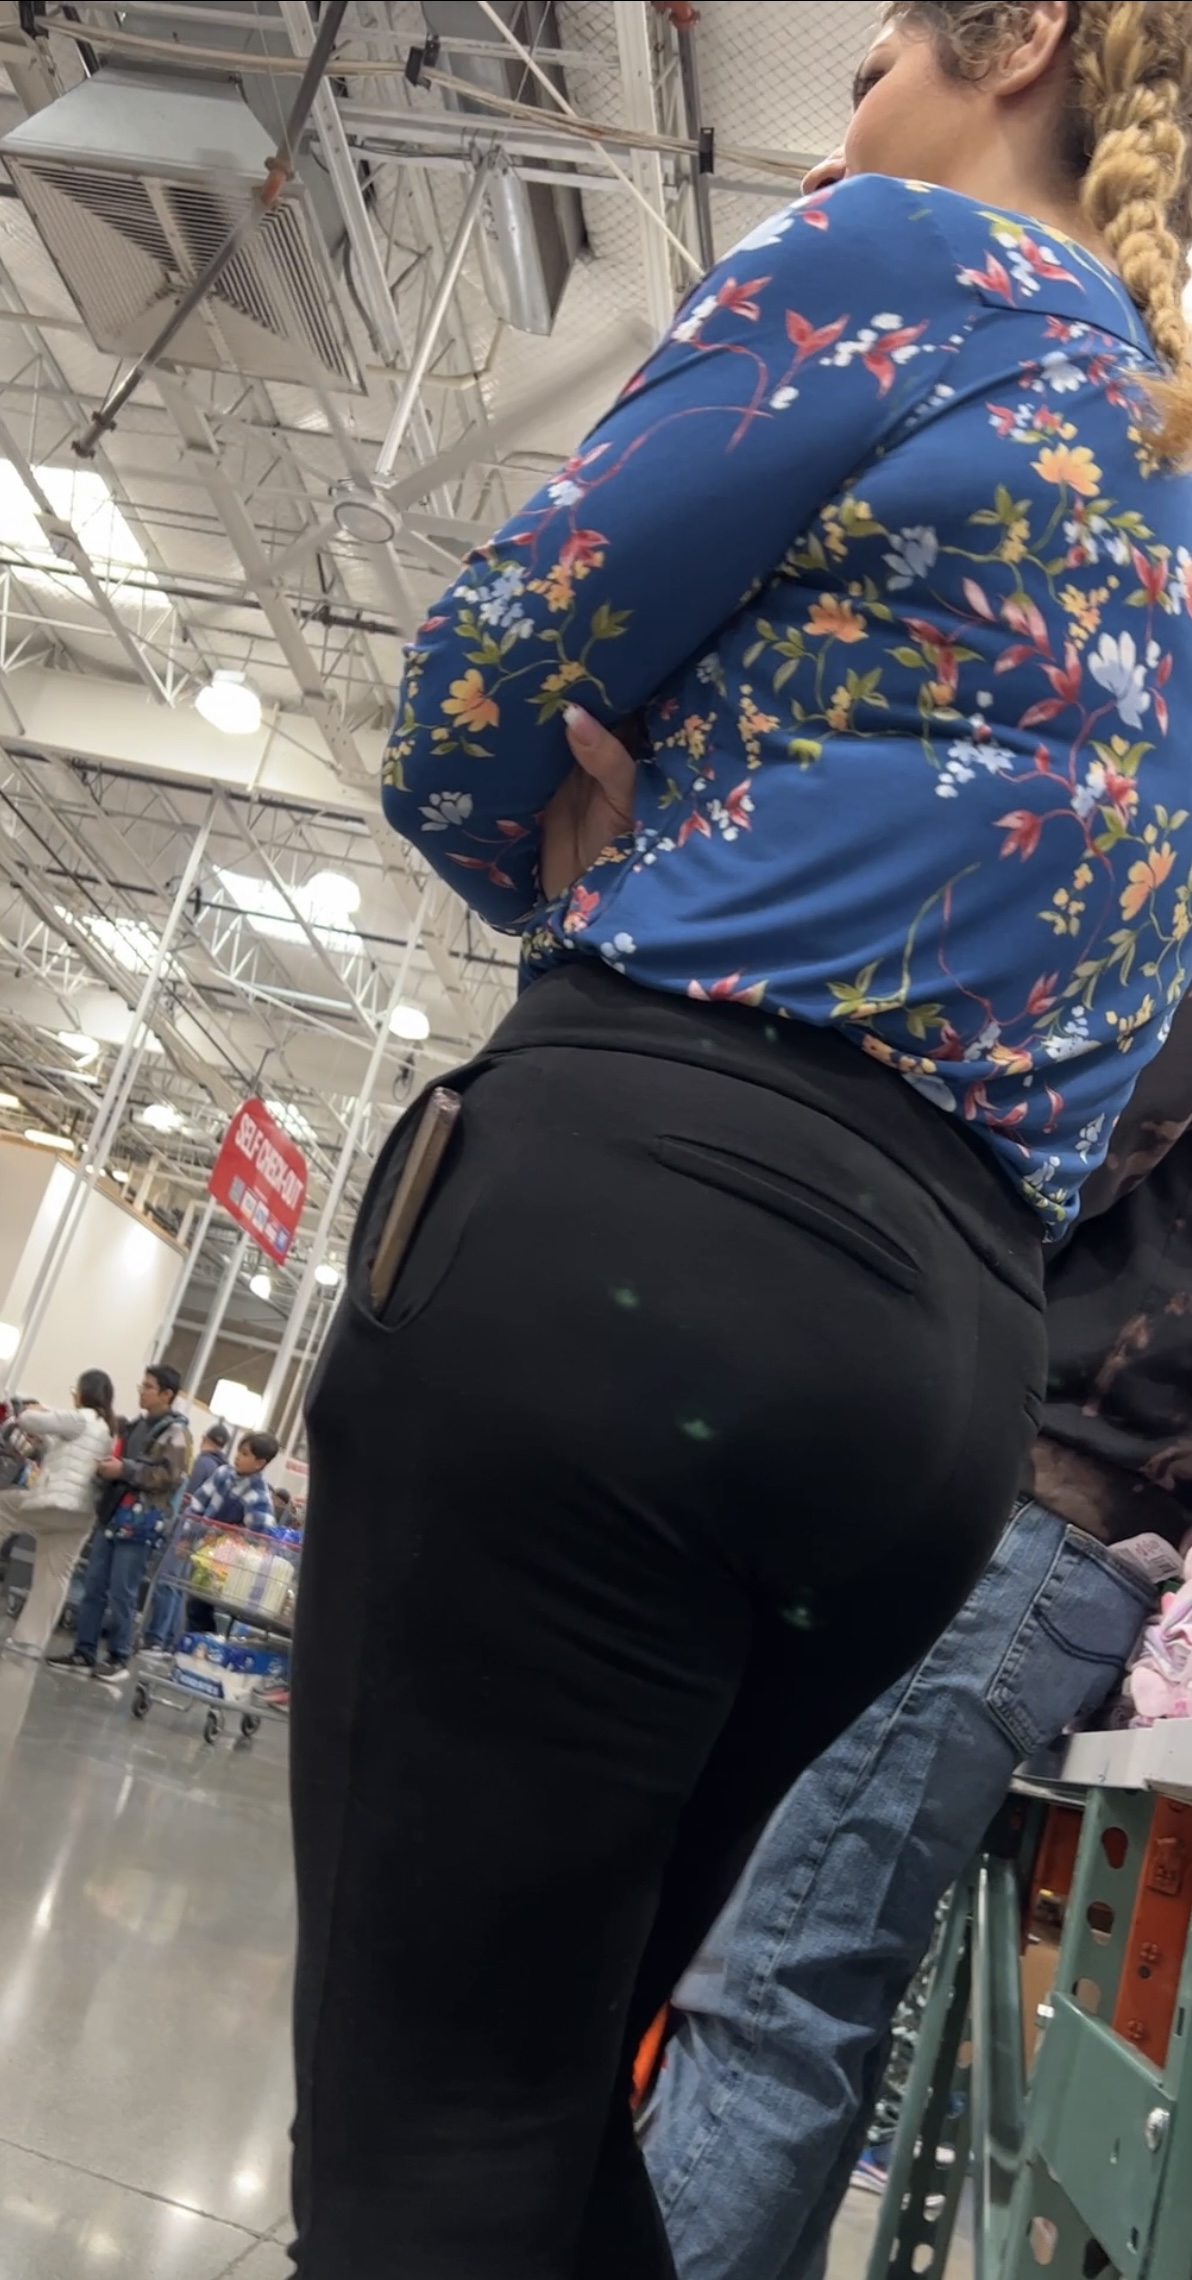 Costco Thick PAWG worker (short video) - Spandex, Leggings & Yoga Pants ...